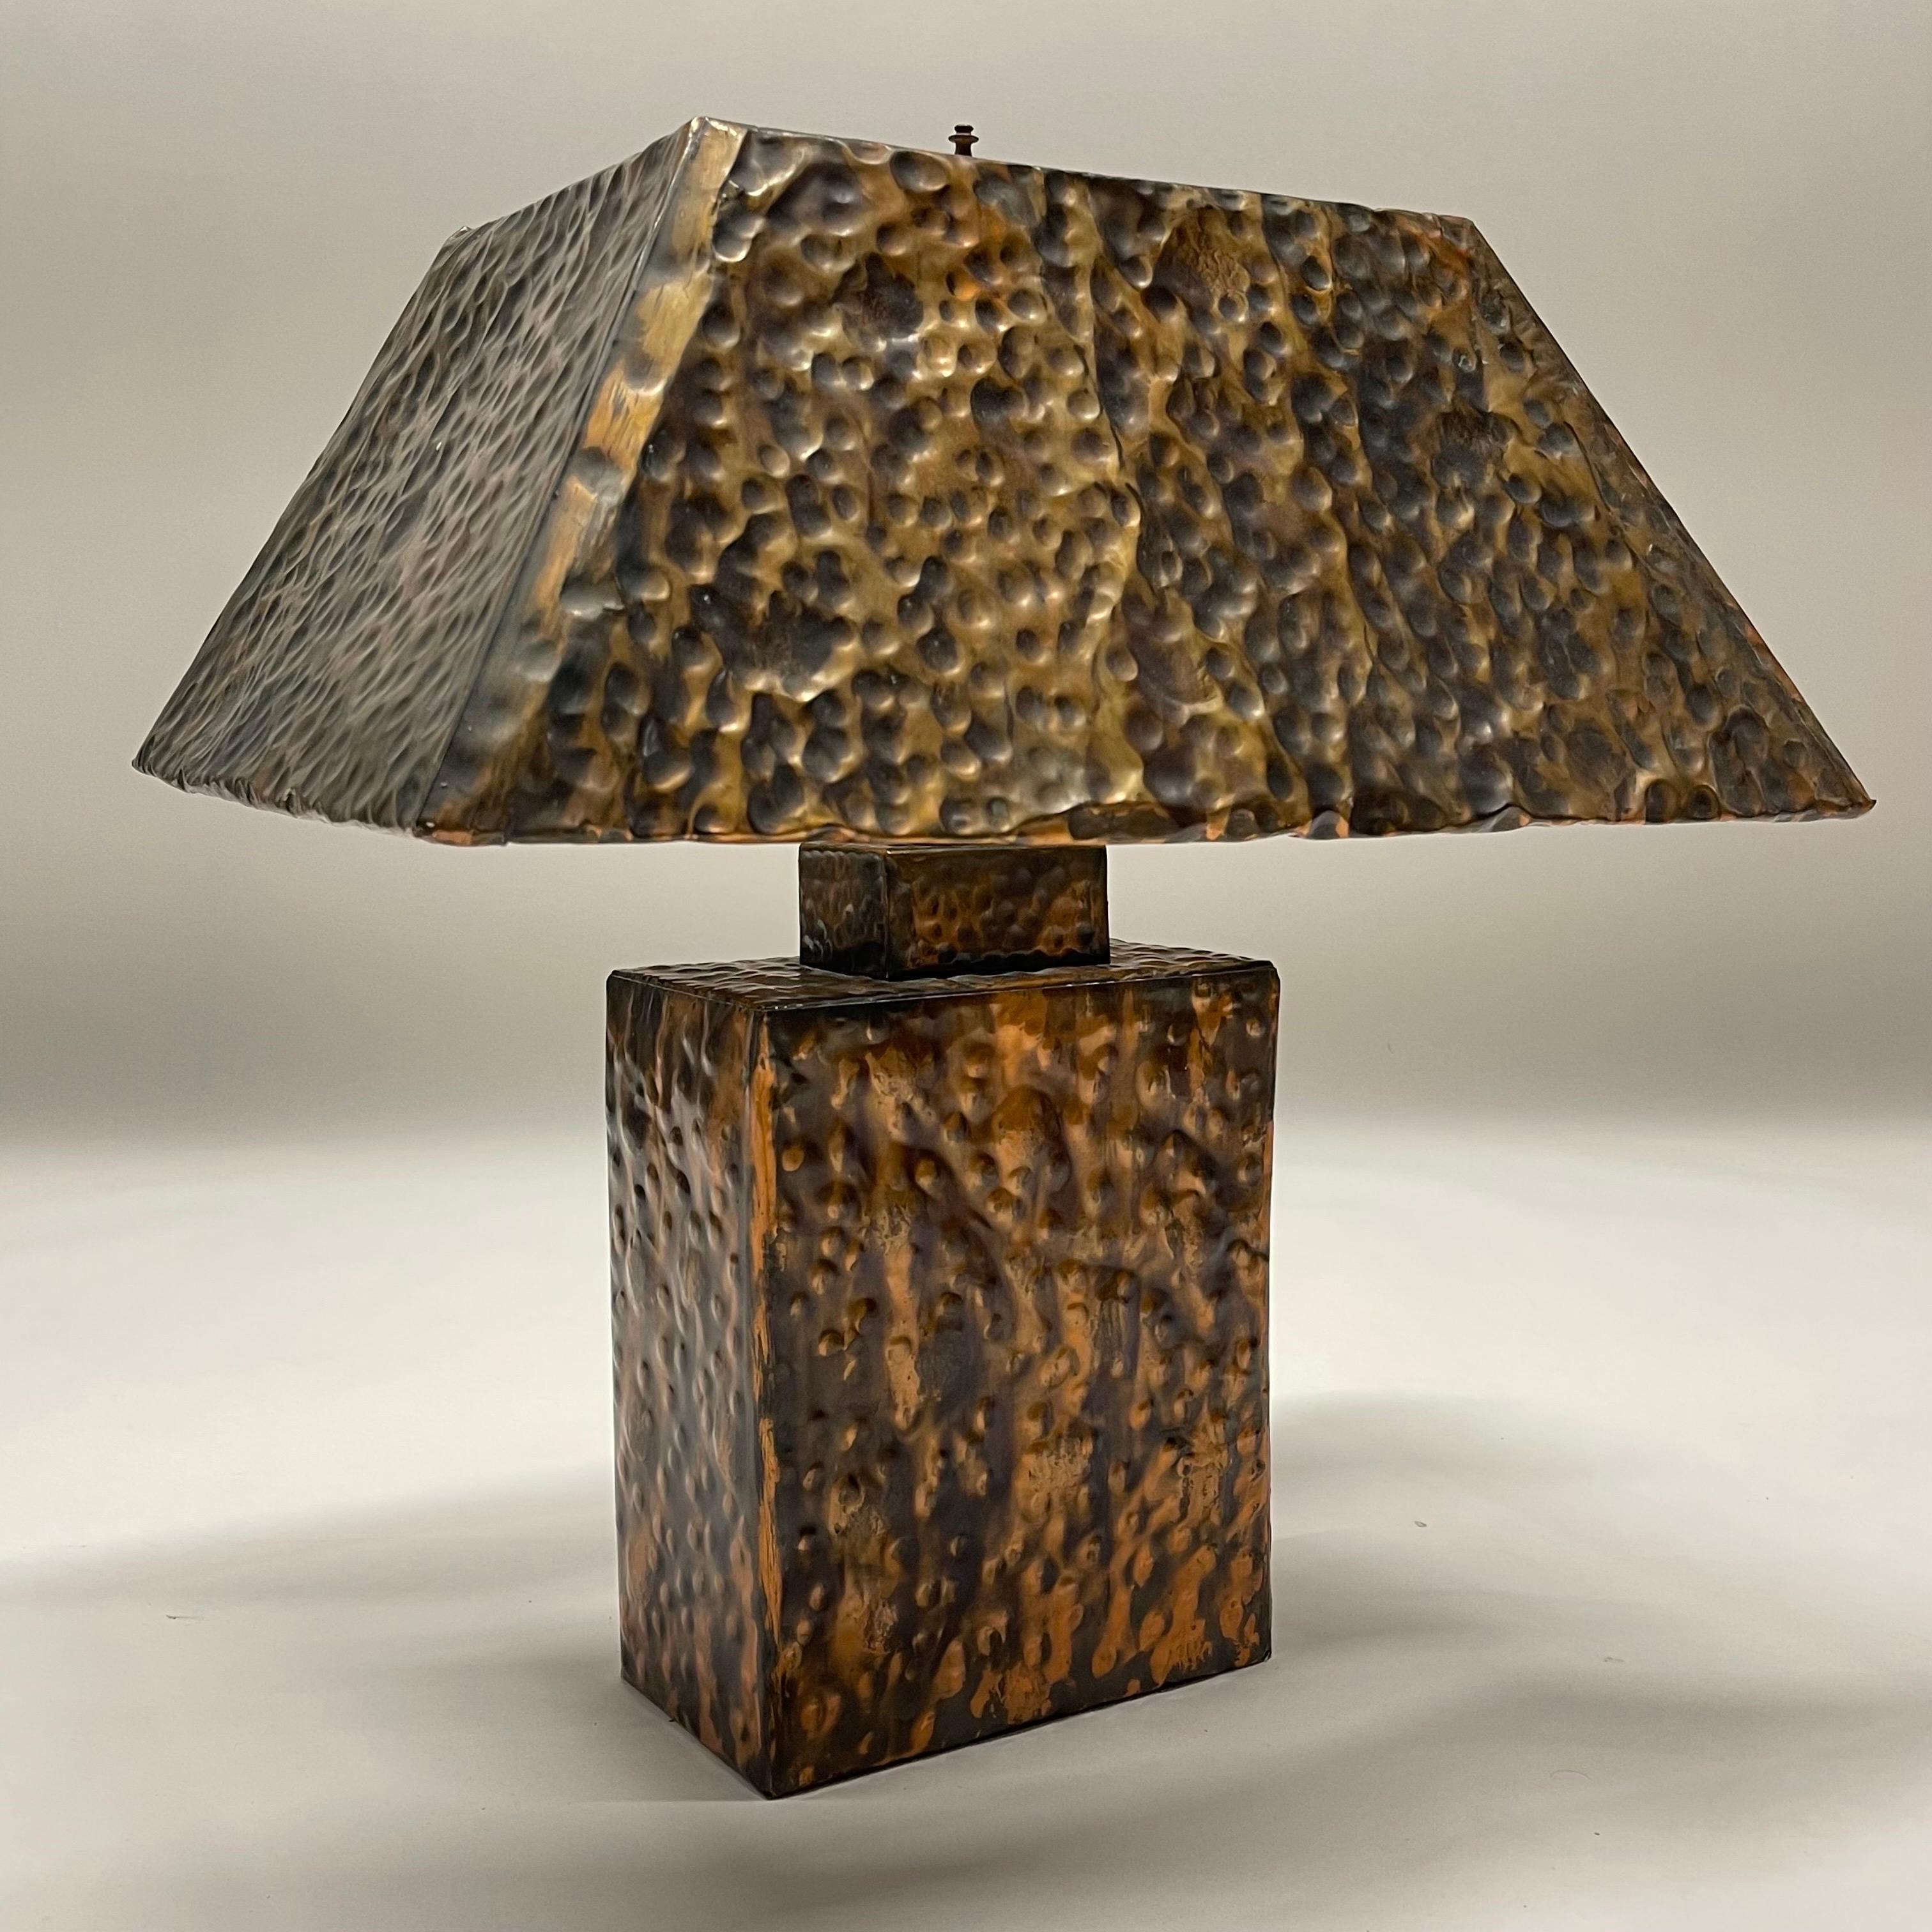 Unique midcentury table lamp rendered in handmade hammered copper welded and formed with matching shade. Italy, circa 1970s.